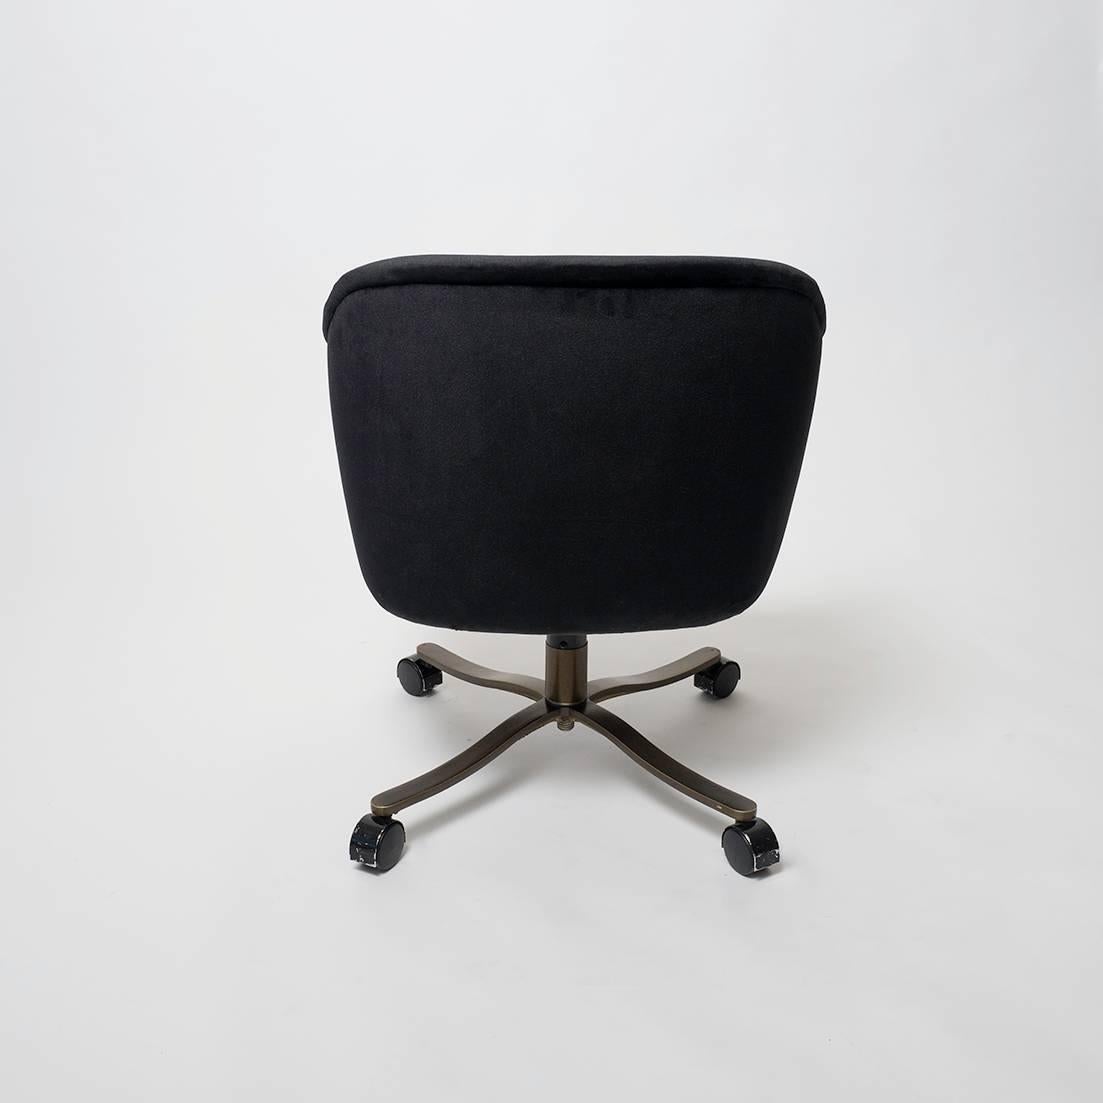 American Single Swiveling Conference Chair by Nicos Zographos